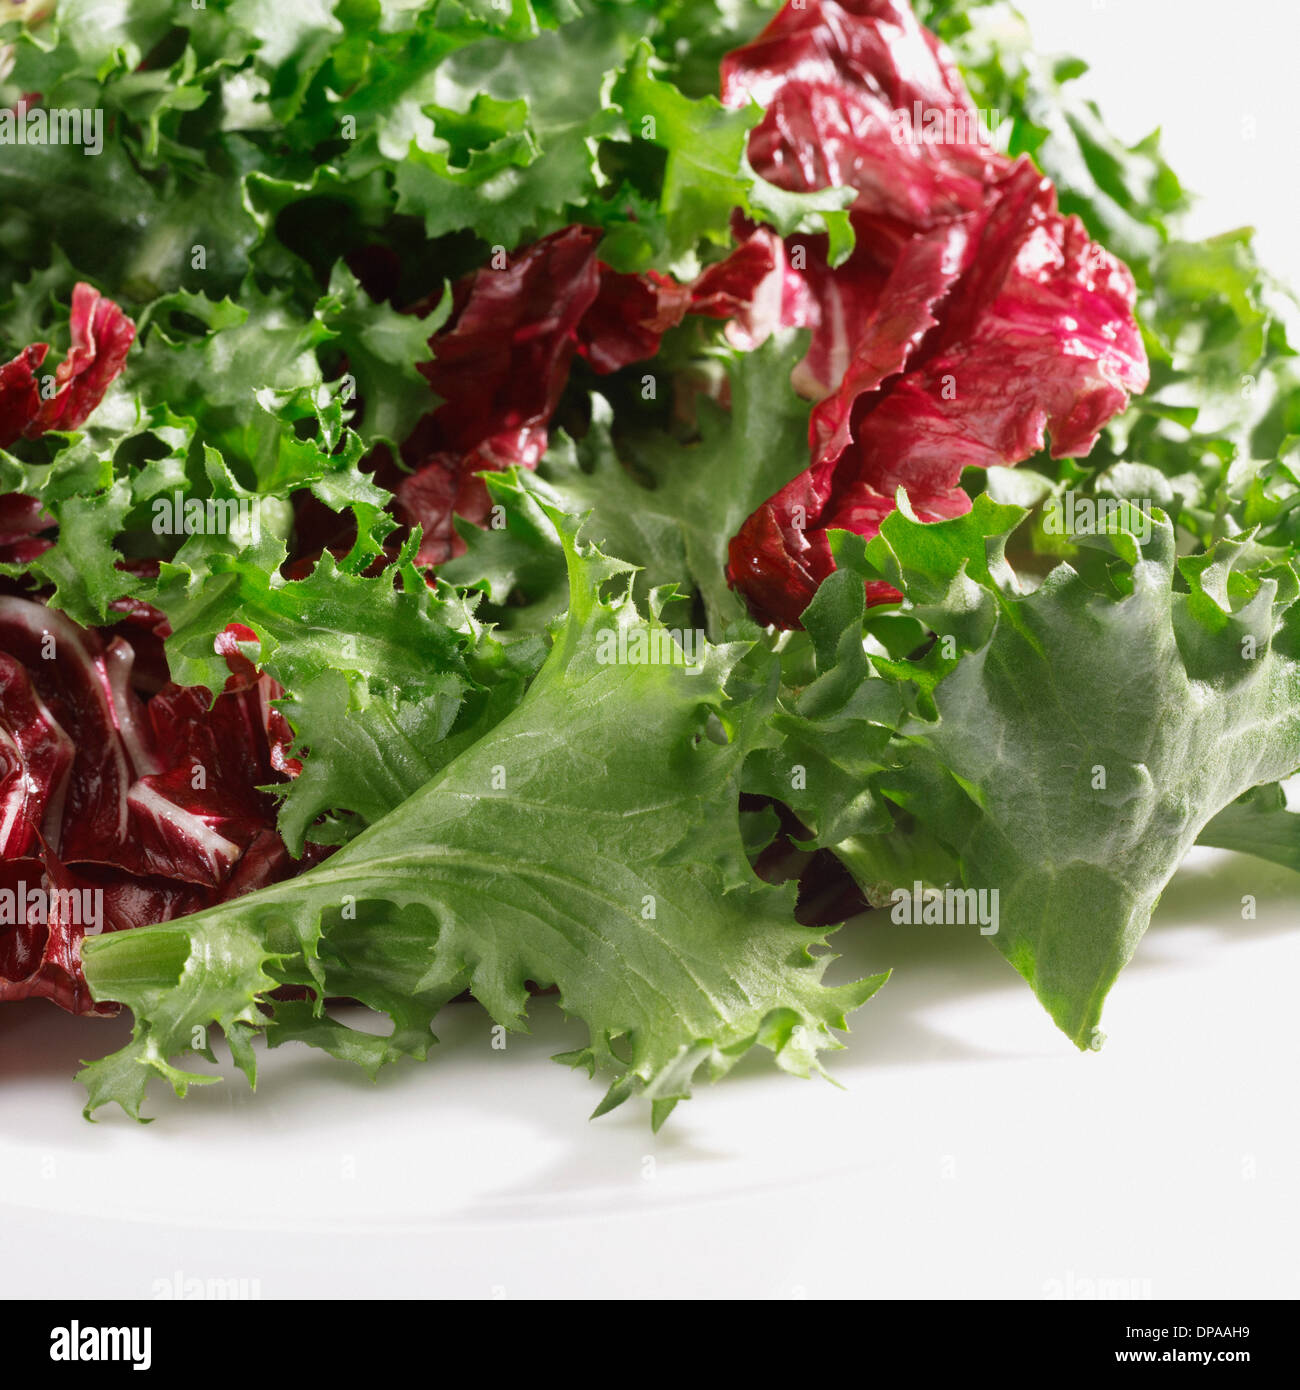 Mixed salad leaves Stock Photo